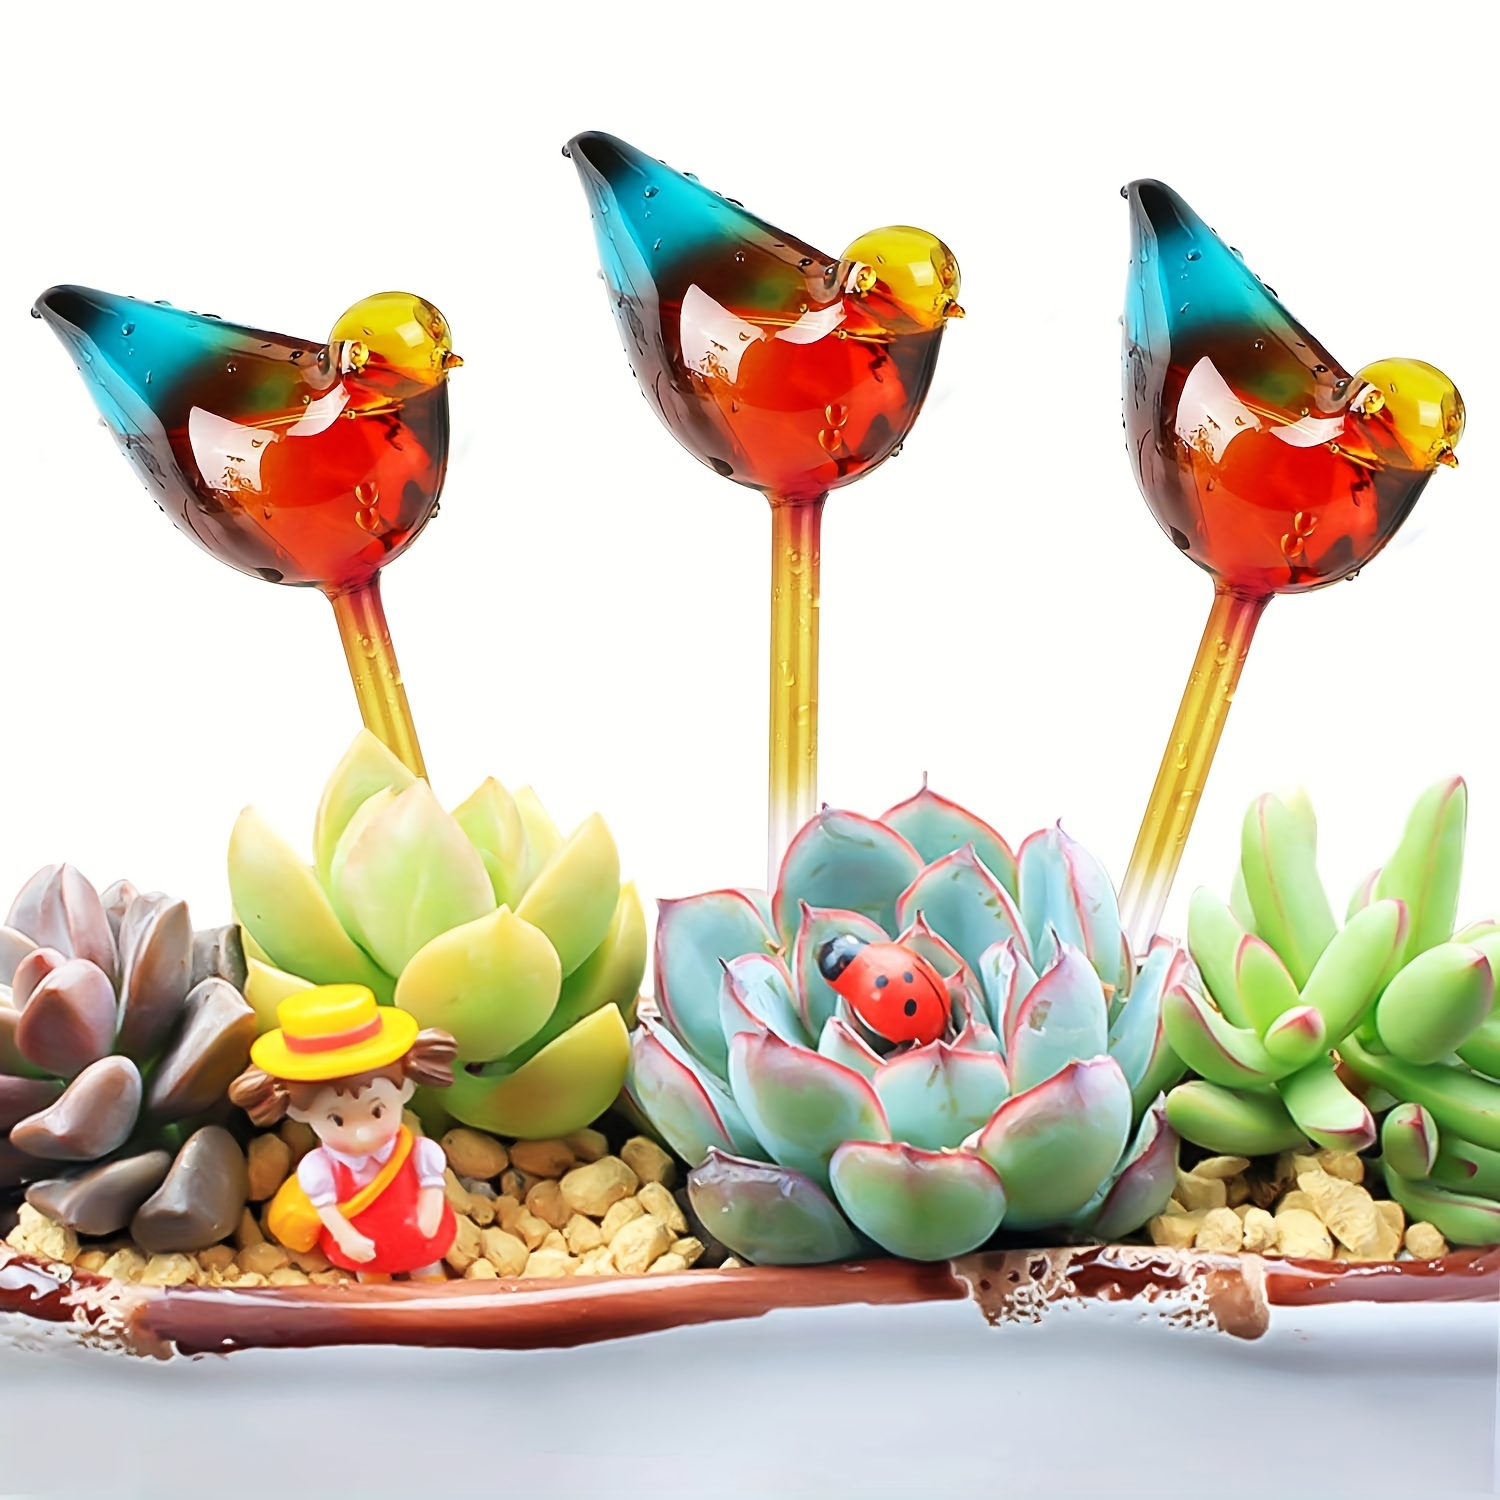 

3pcs Bird Shaped Plant Self Watering Device, Plant Watering Device Colorful Automatic Glass Plant Watering Small Hand Blowing Ball Indoor And Outdoor Garden Plants Keep Soil Moisture Device